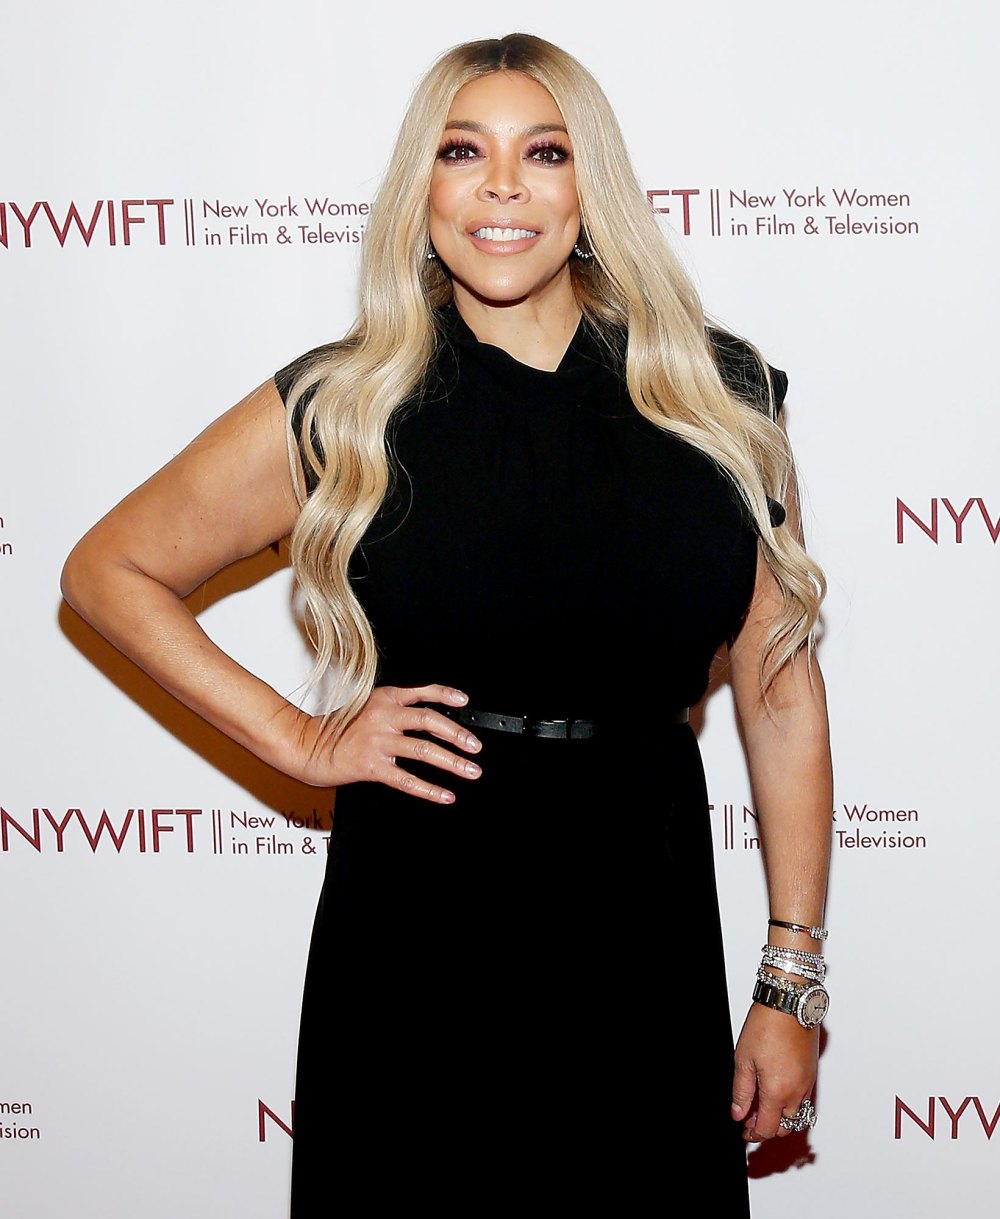 Wendy Williams’ Brother Says She Has Shown ‘Substantial Amount of Improvement’ Since Filming Doc